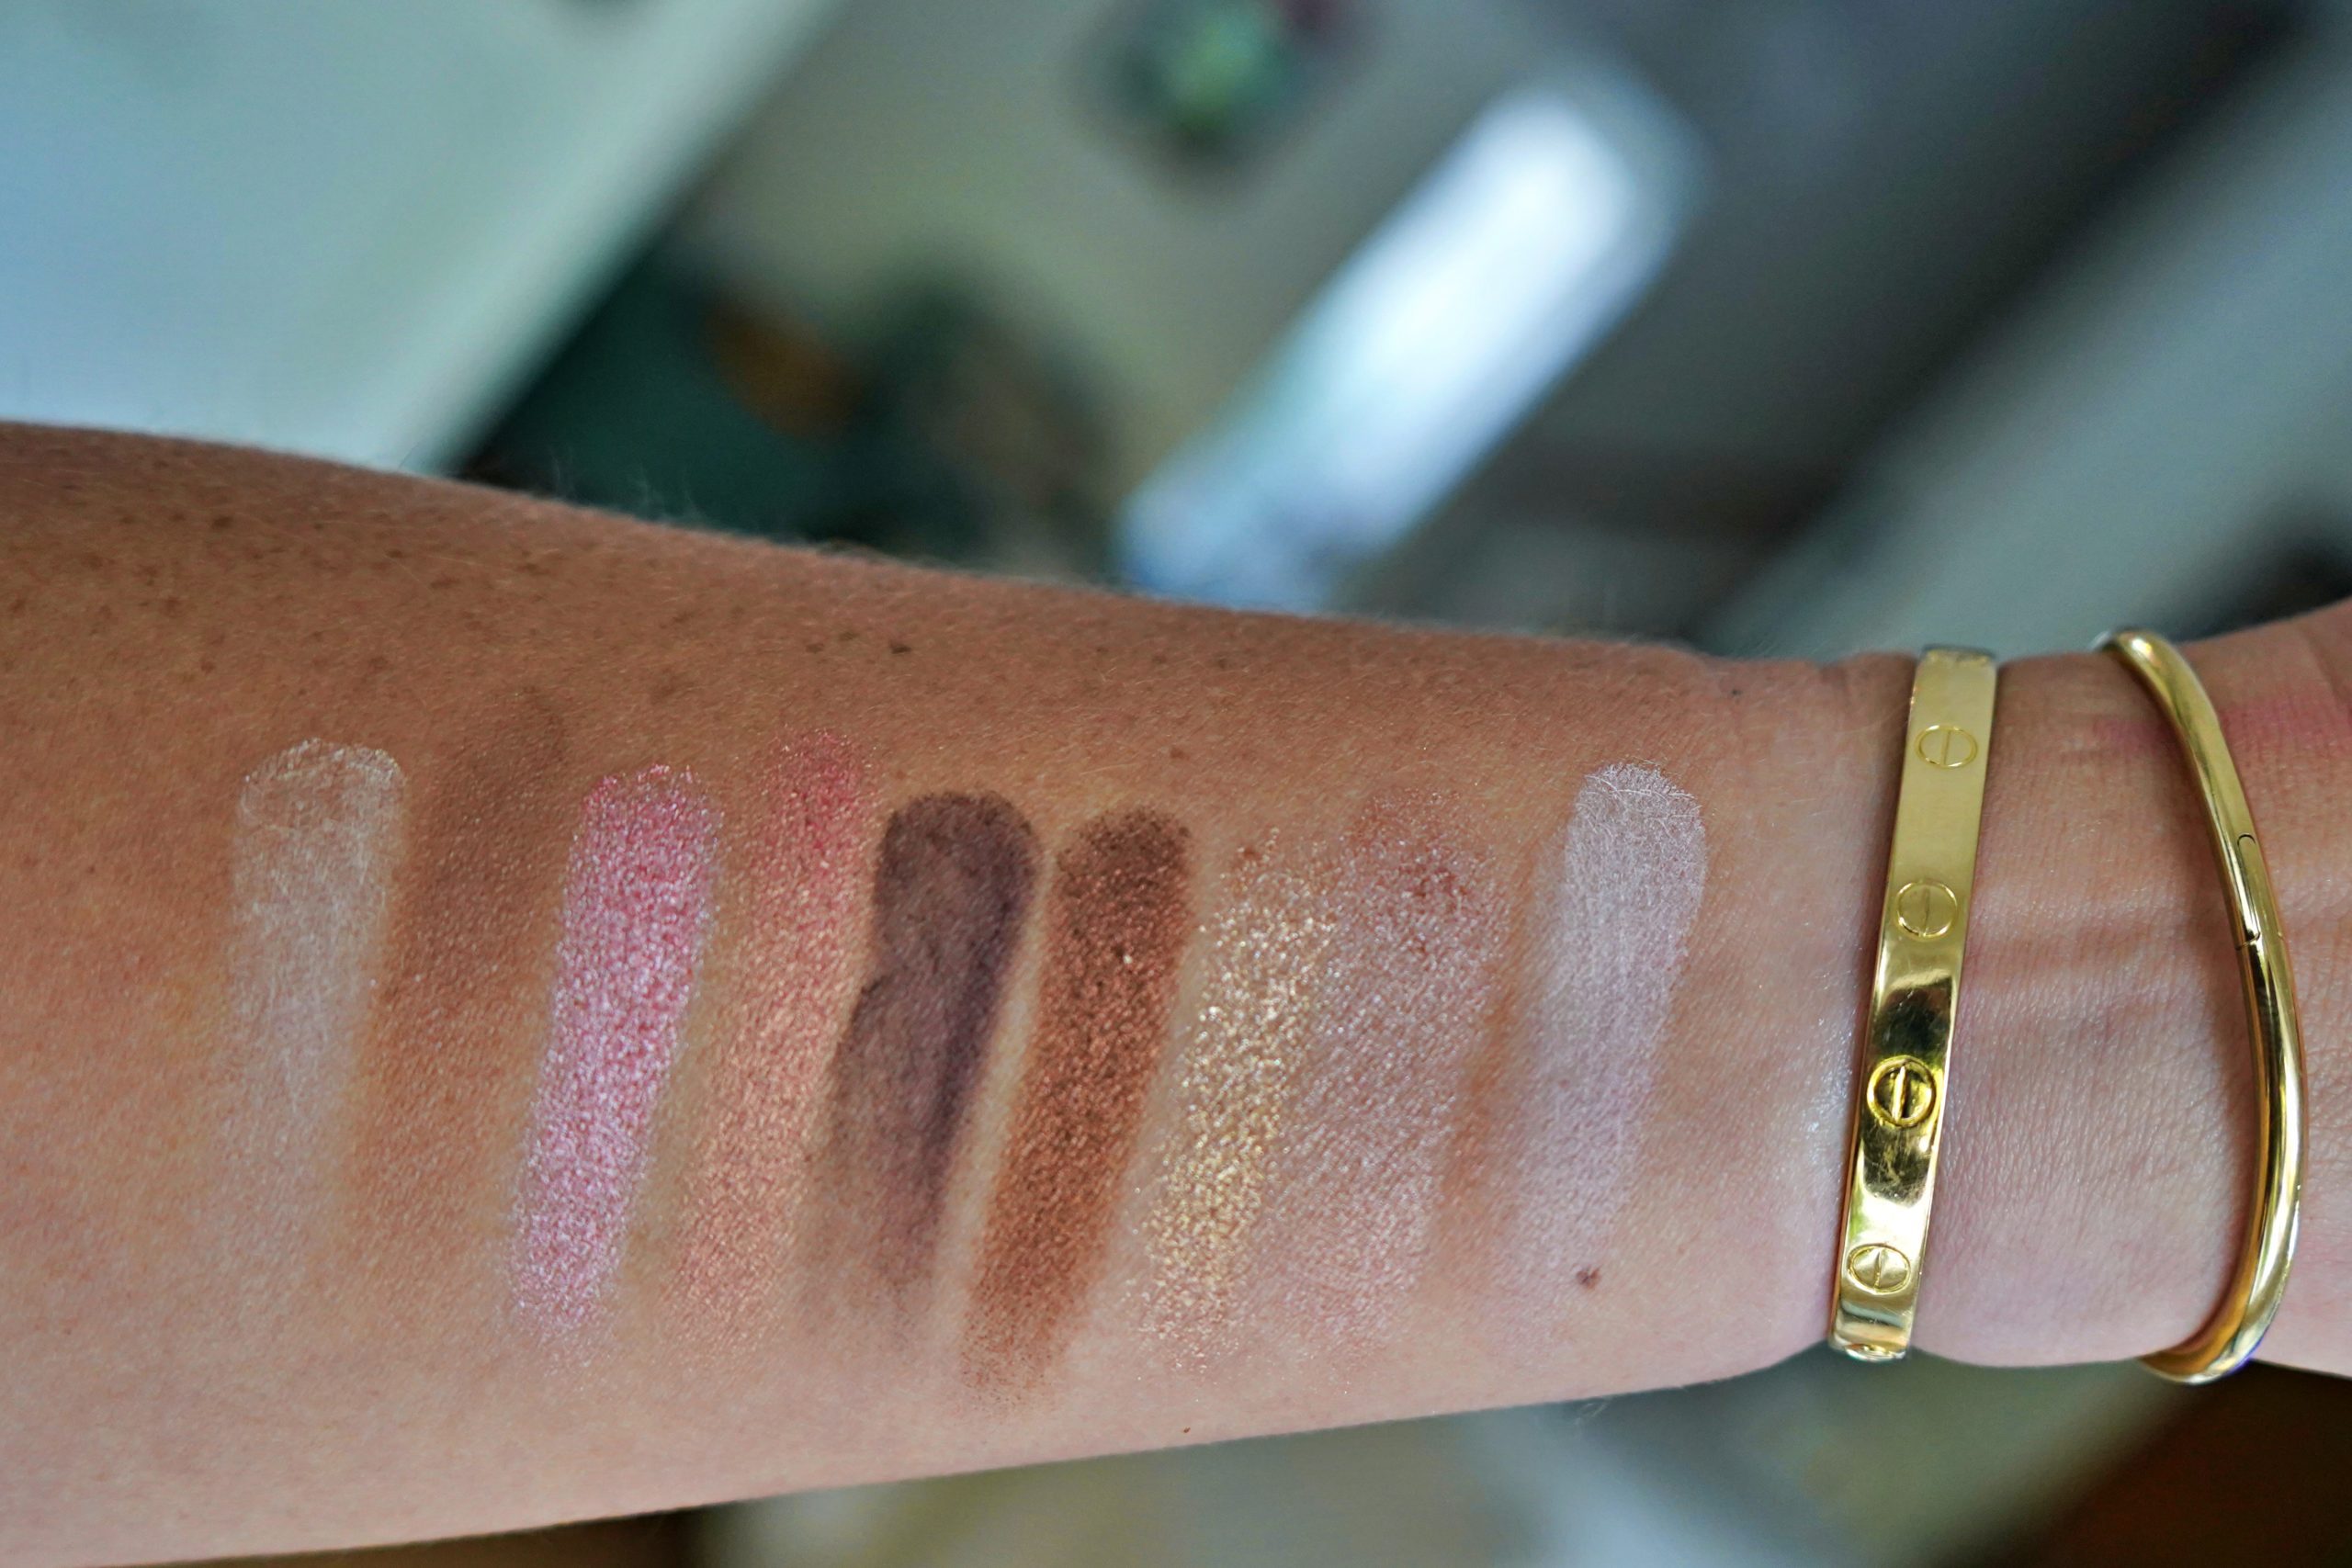 Swatches of the BY TERRY VIP Expert Paris Mon Amour Palette